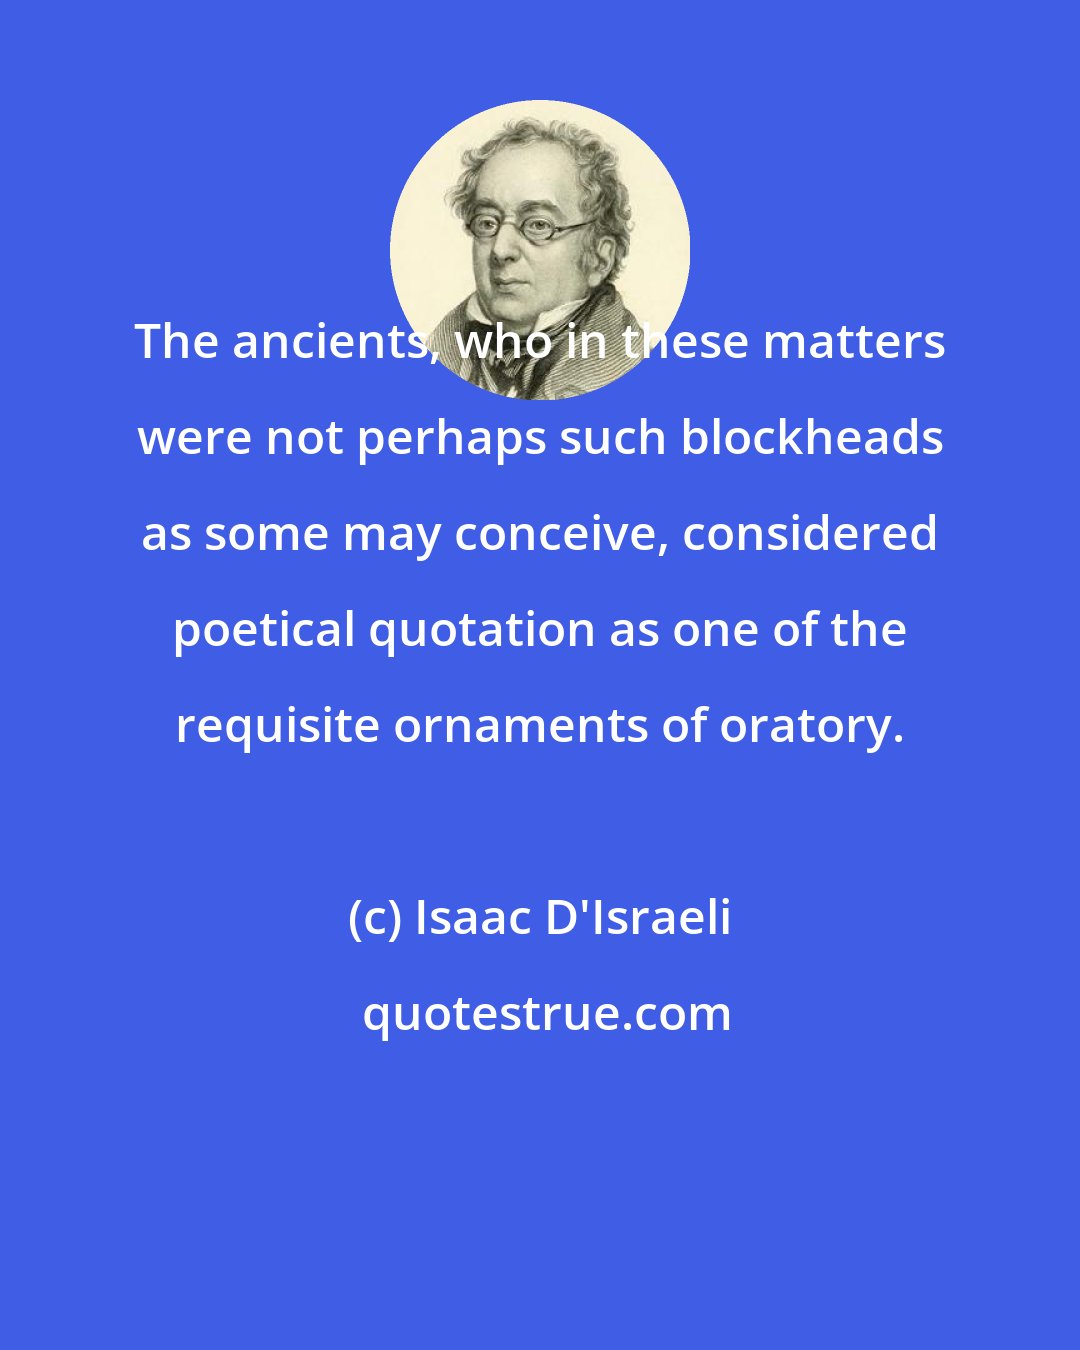 Isaac D'Israeli: The ancients, who in these matters were not perhaps such blockheads as some may conceive, considered poetical quotation as one of the requisite ornaments of oratory.